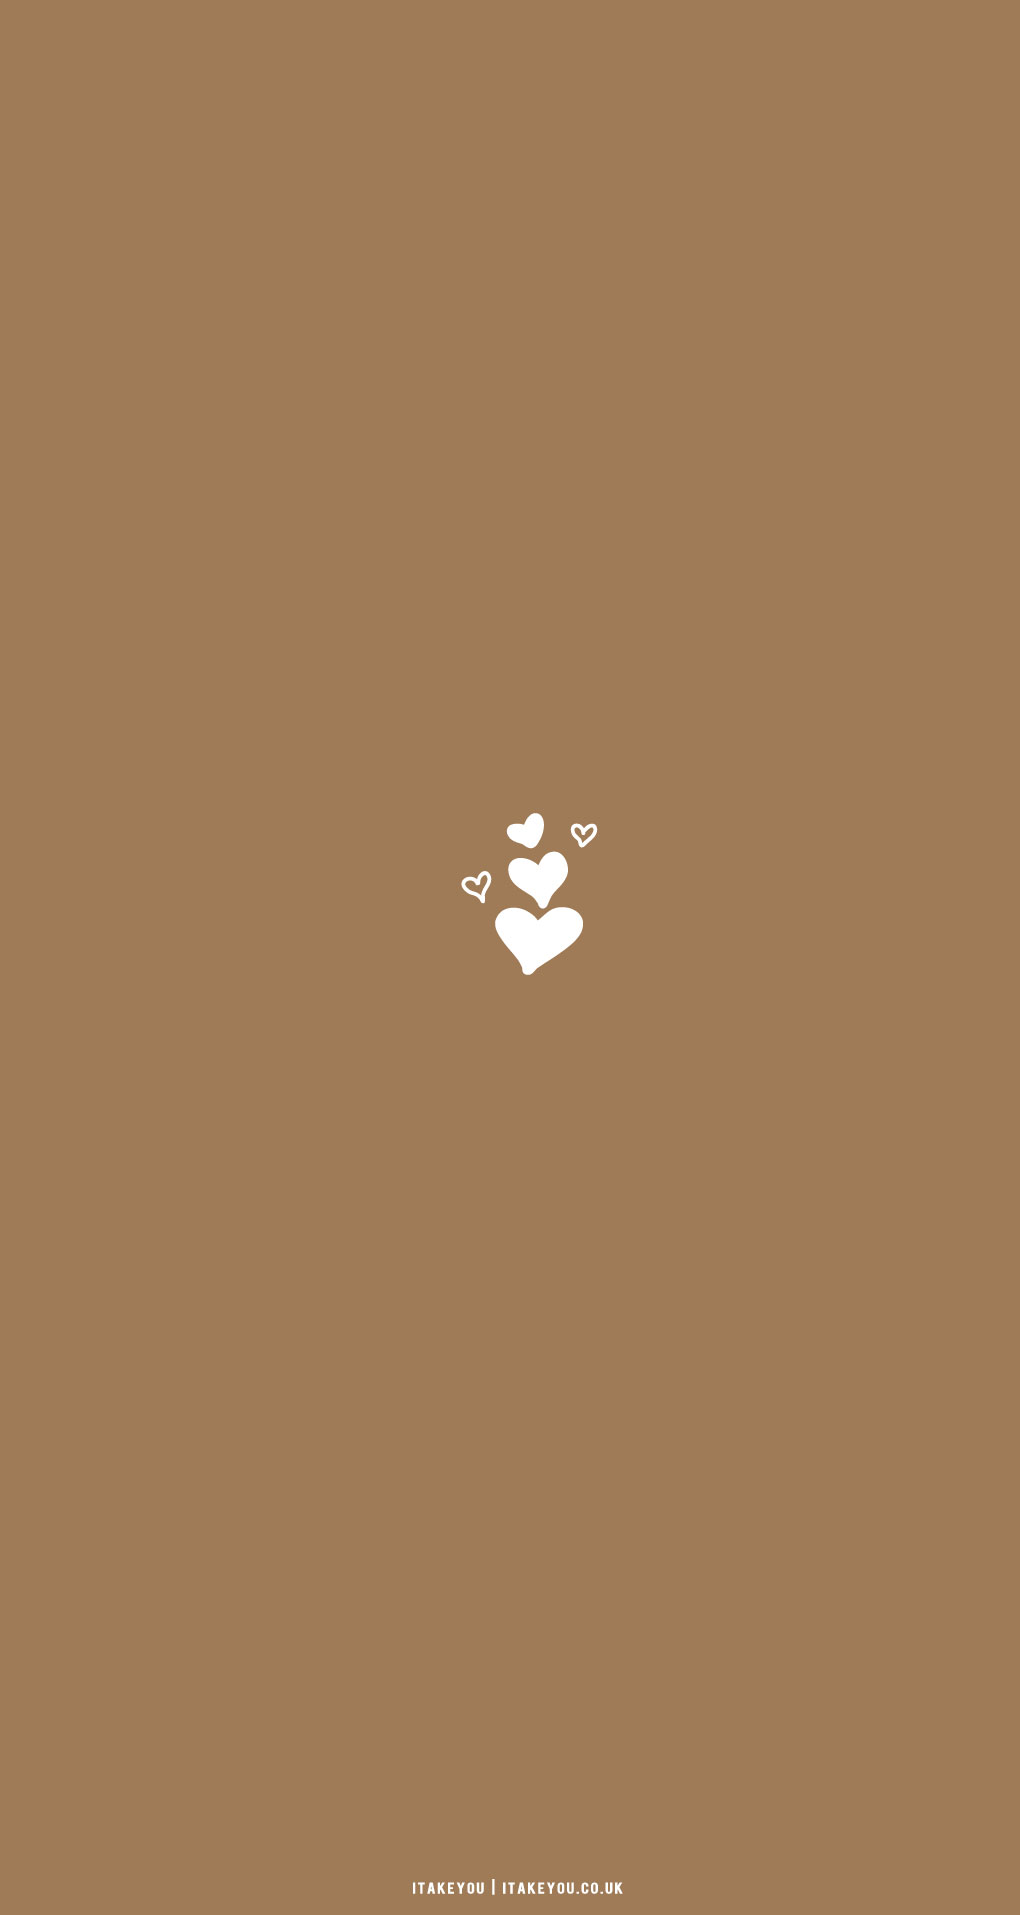 30 Cute Brown Aesthetic Wallpapers for Phone : Lots of Love Aesthetic  Wallpaper I Take You | Wedding Readings | Wedding Ideas | Wedding Dresses |  Wedding Theme